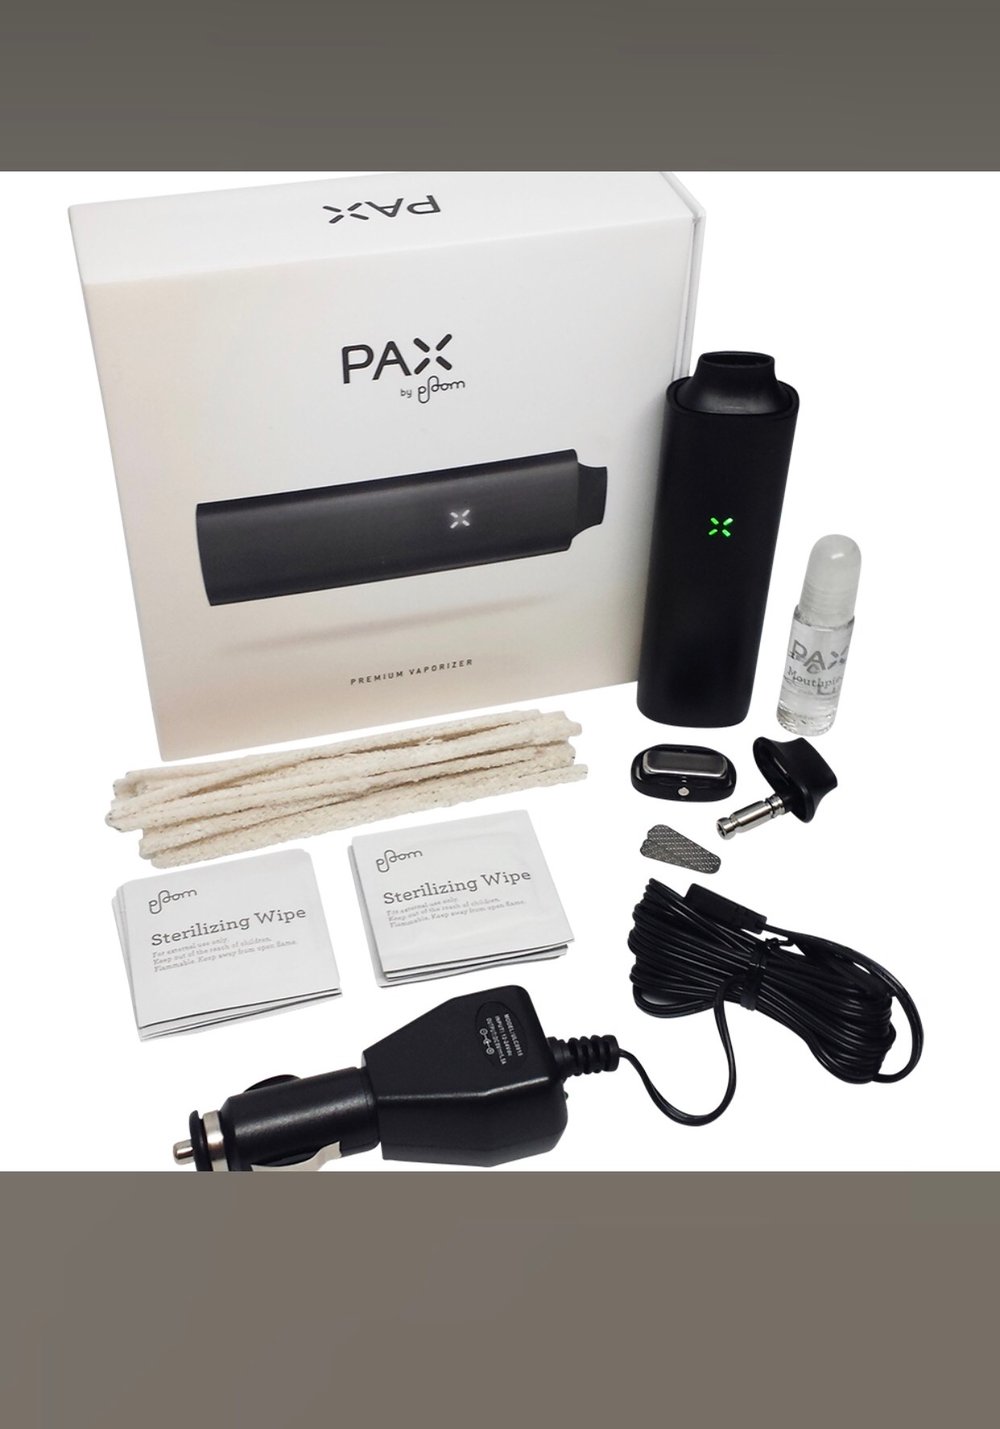 Image of PAX Vaporizer by Ploom